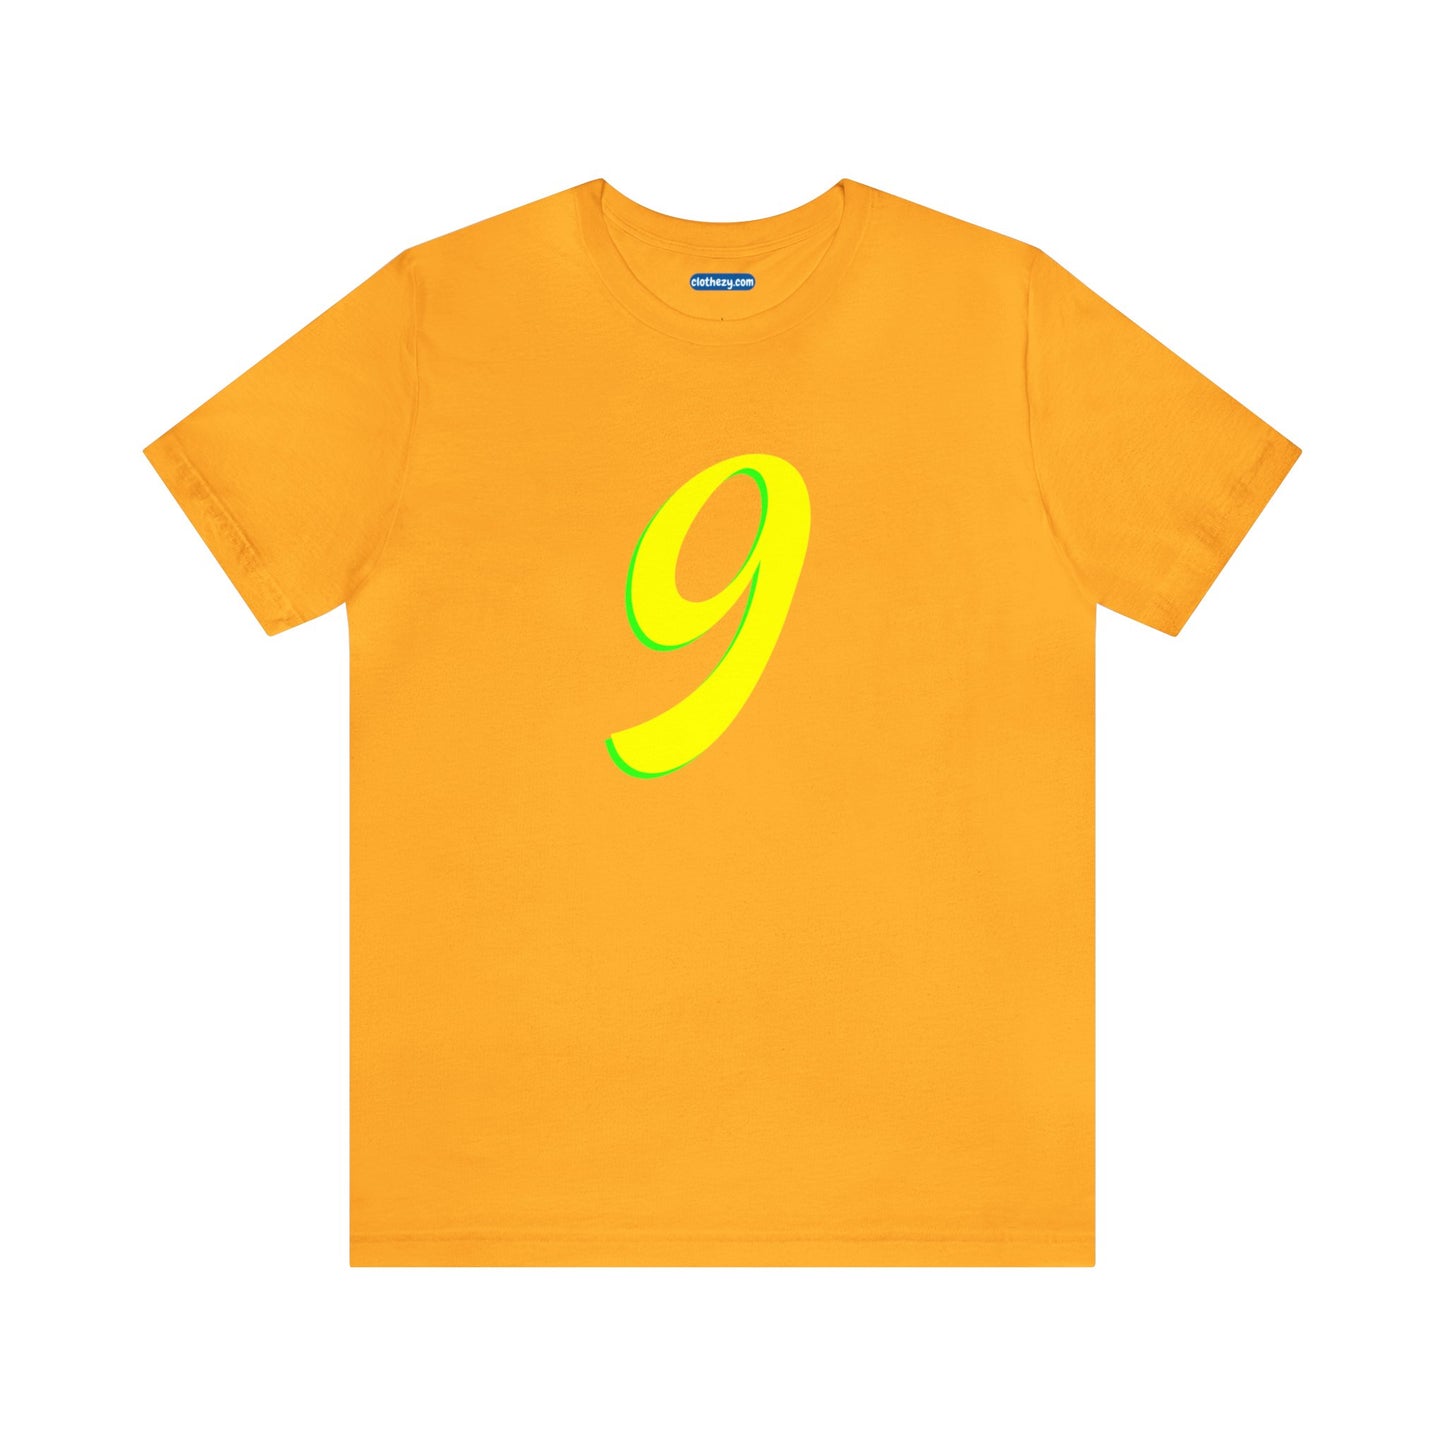 Number 9 Design - Soft Cotton Tee for birthdays and celebrations, Gift for friends and family, Multiple Options by clothezy.com in Green Heather Size Small - Buy Now